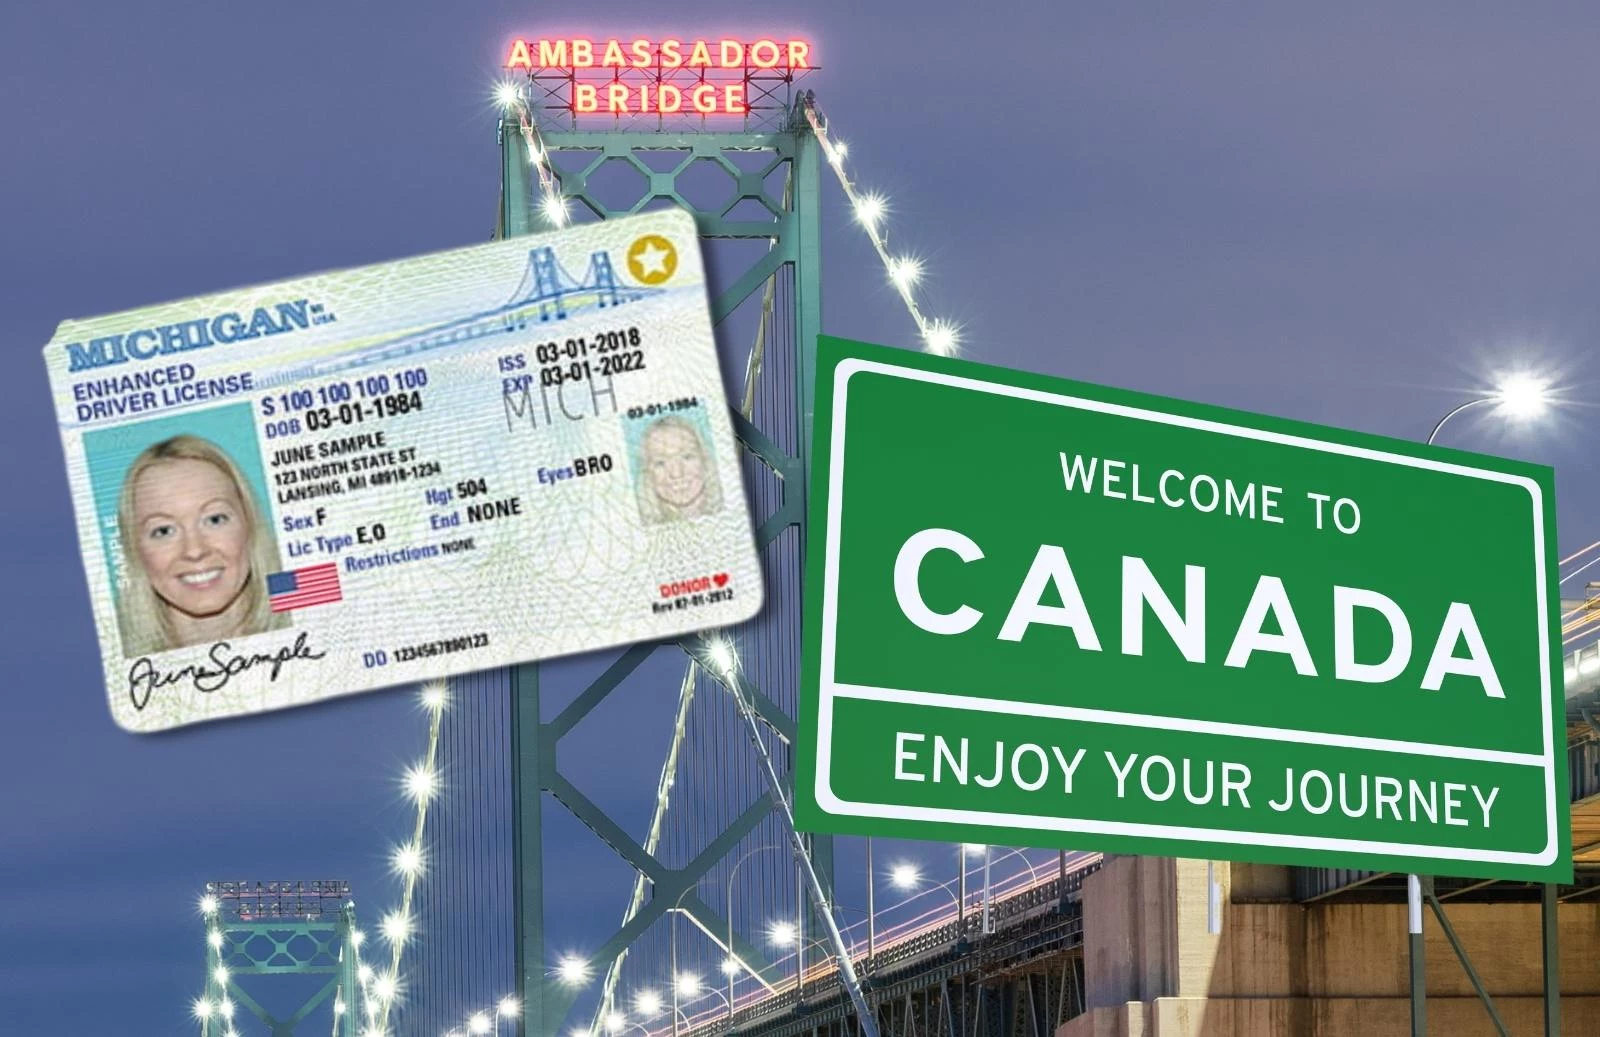 New photo ID for non-drivers in Ontario